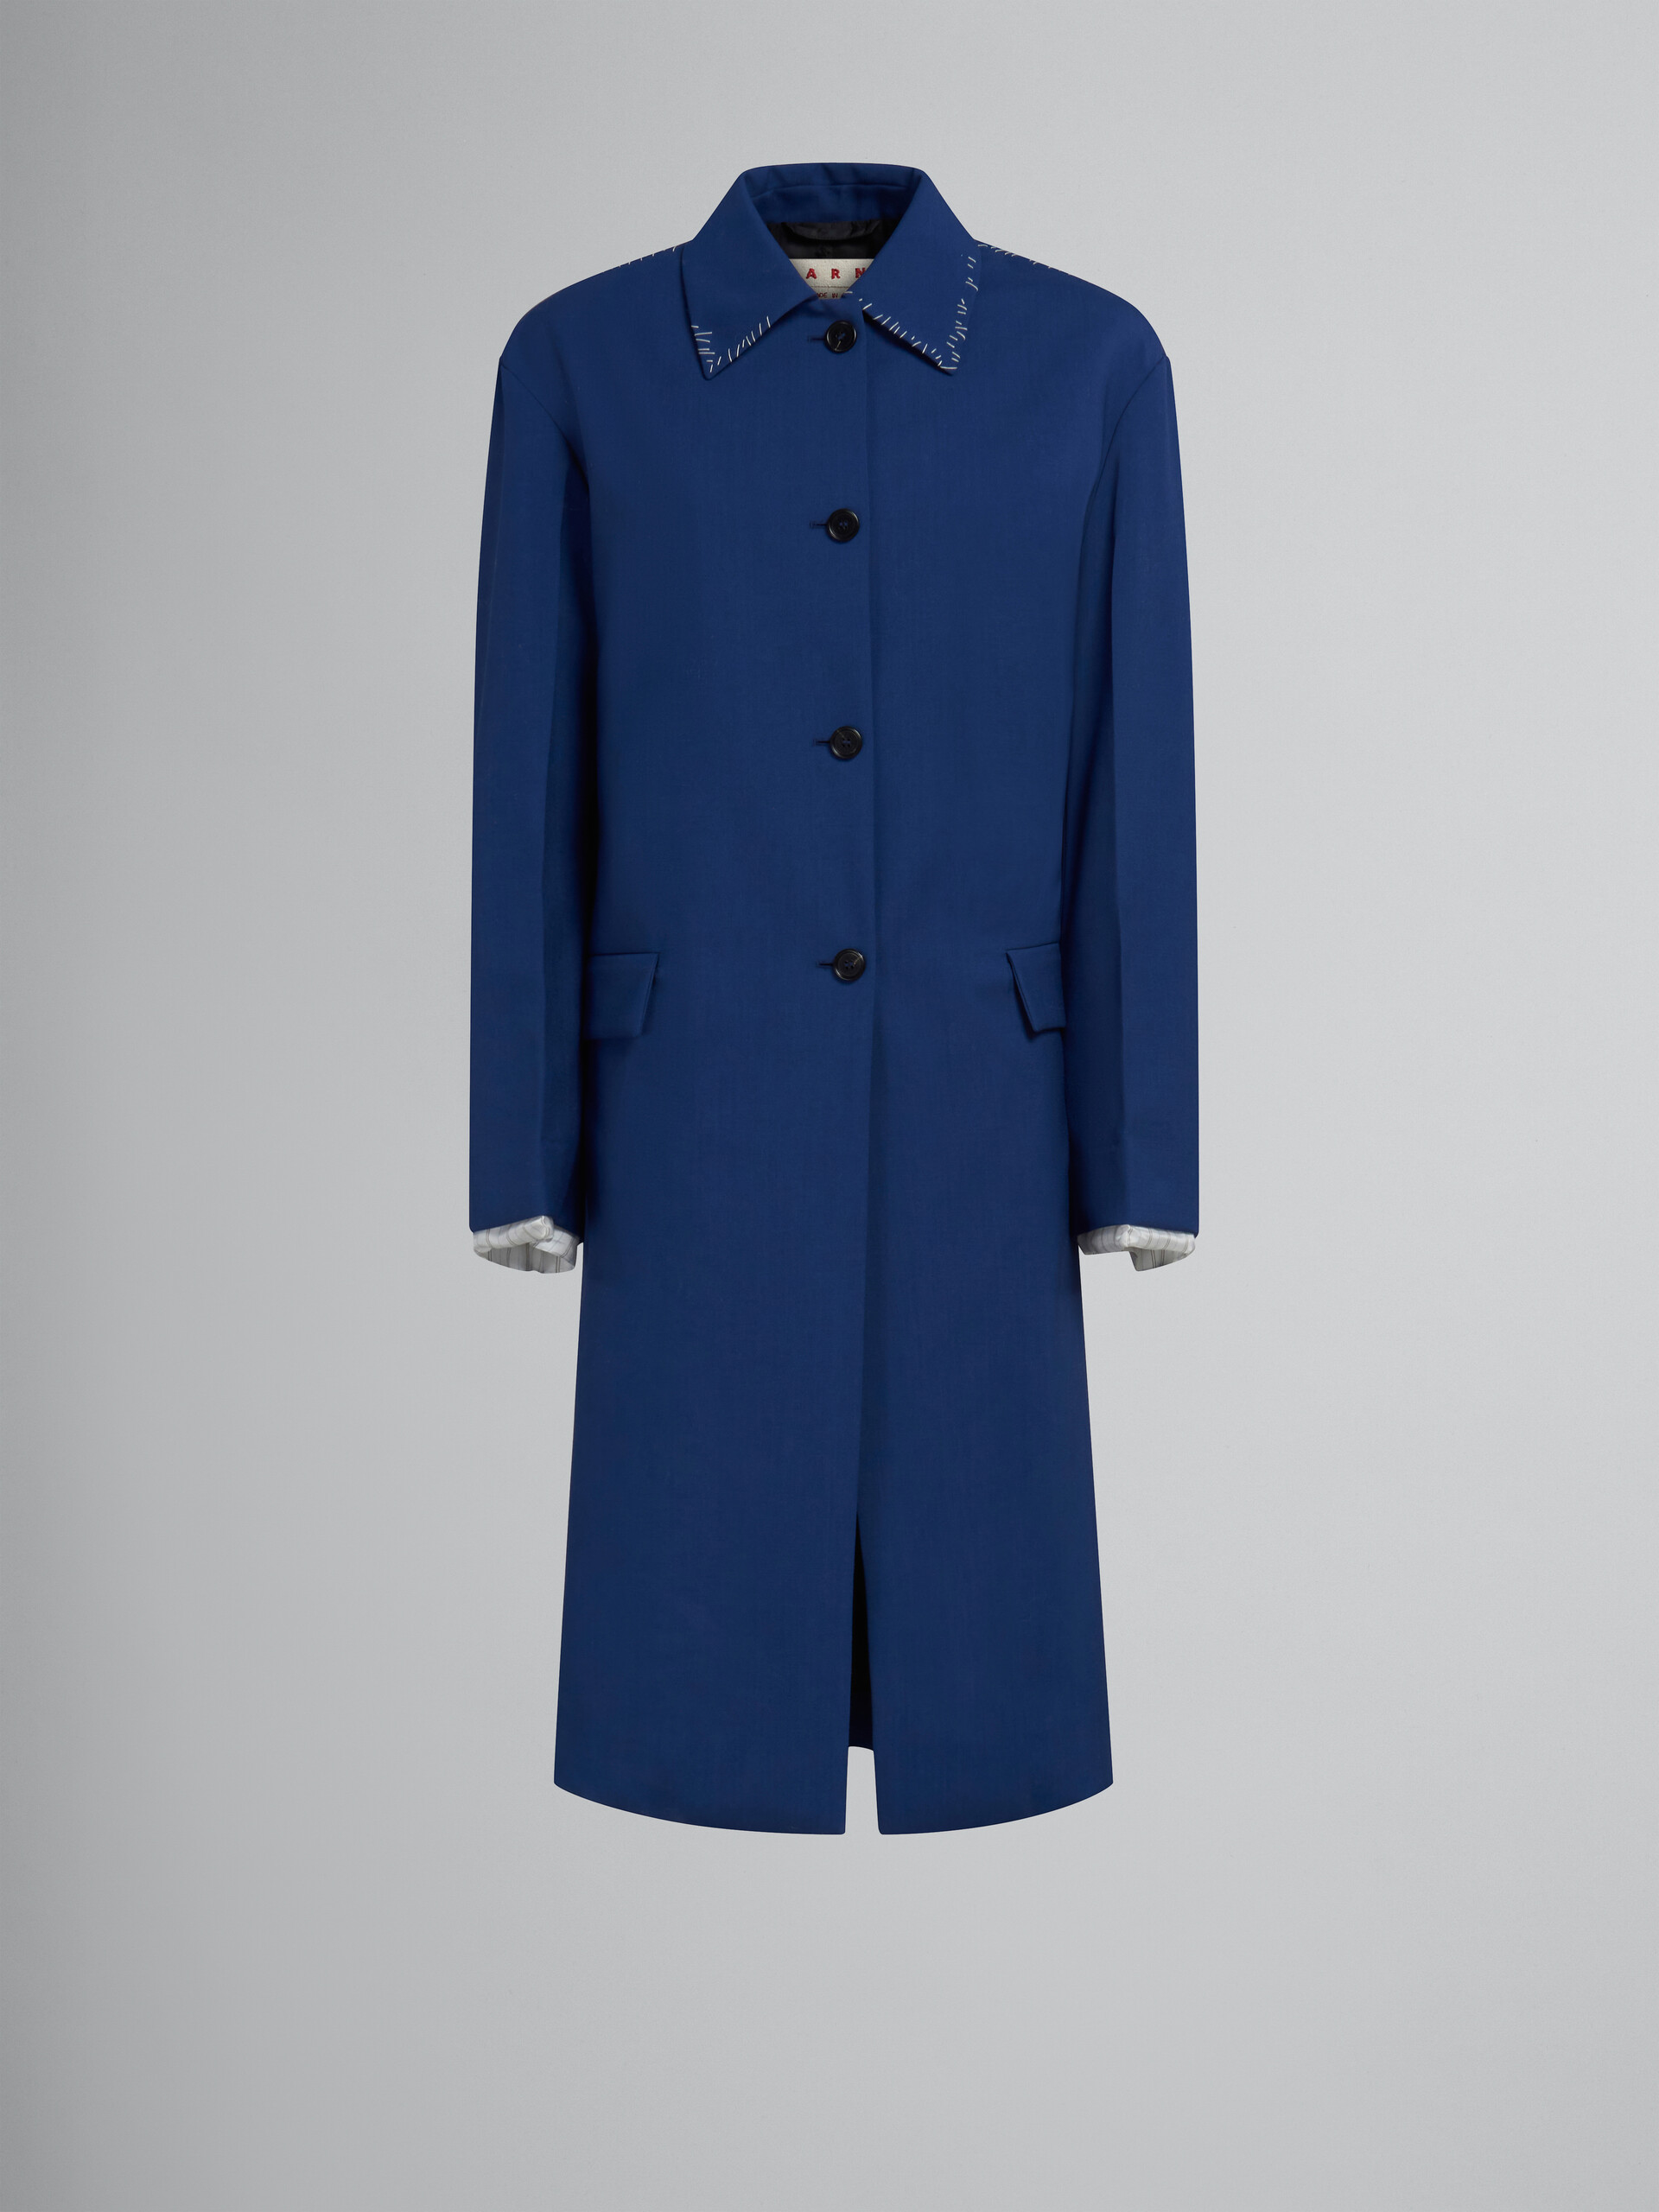 Blue tropical wool trench coat - Coats - Image 1